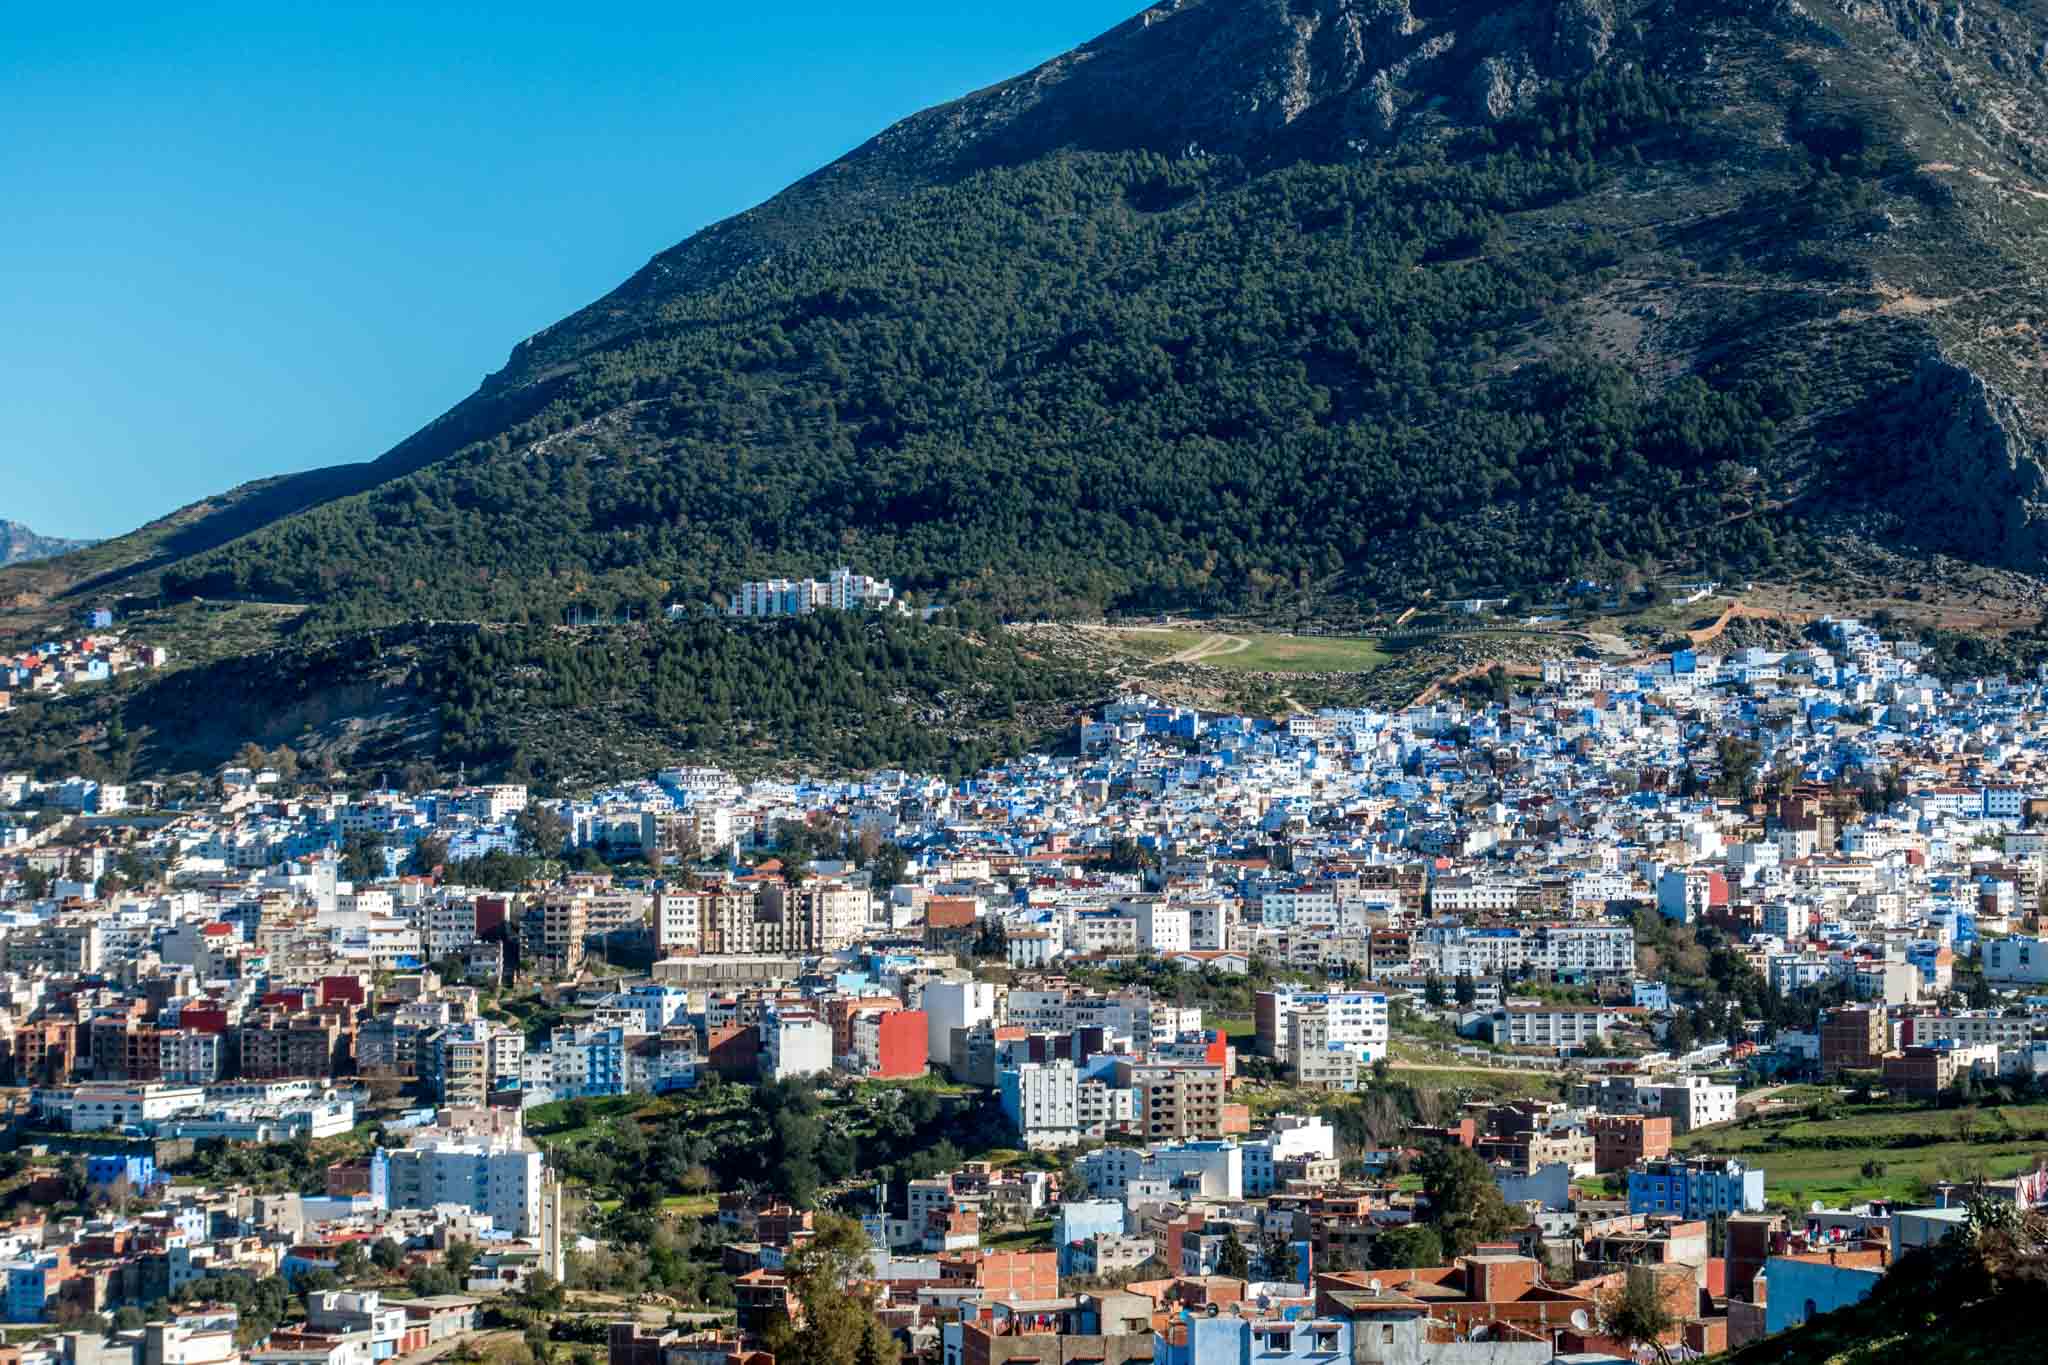 Panoramic view of Chefchaouen Morocco, in the Rif Mountains